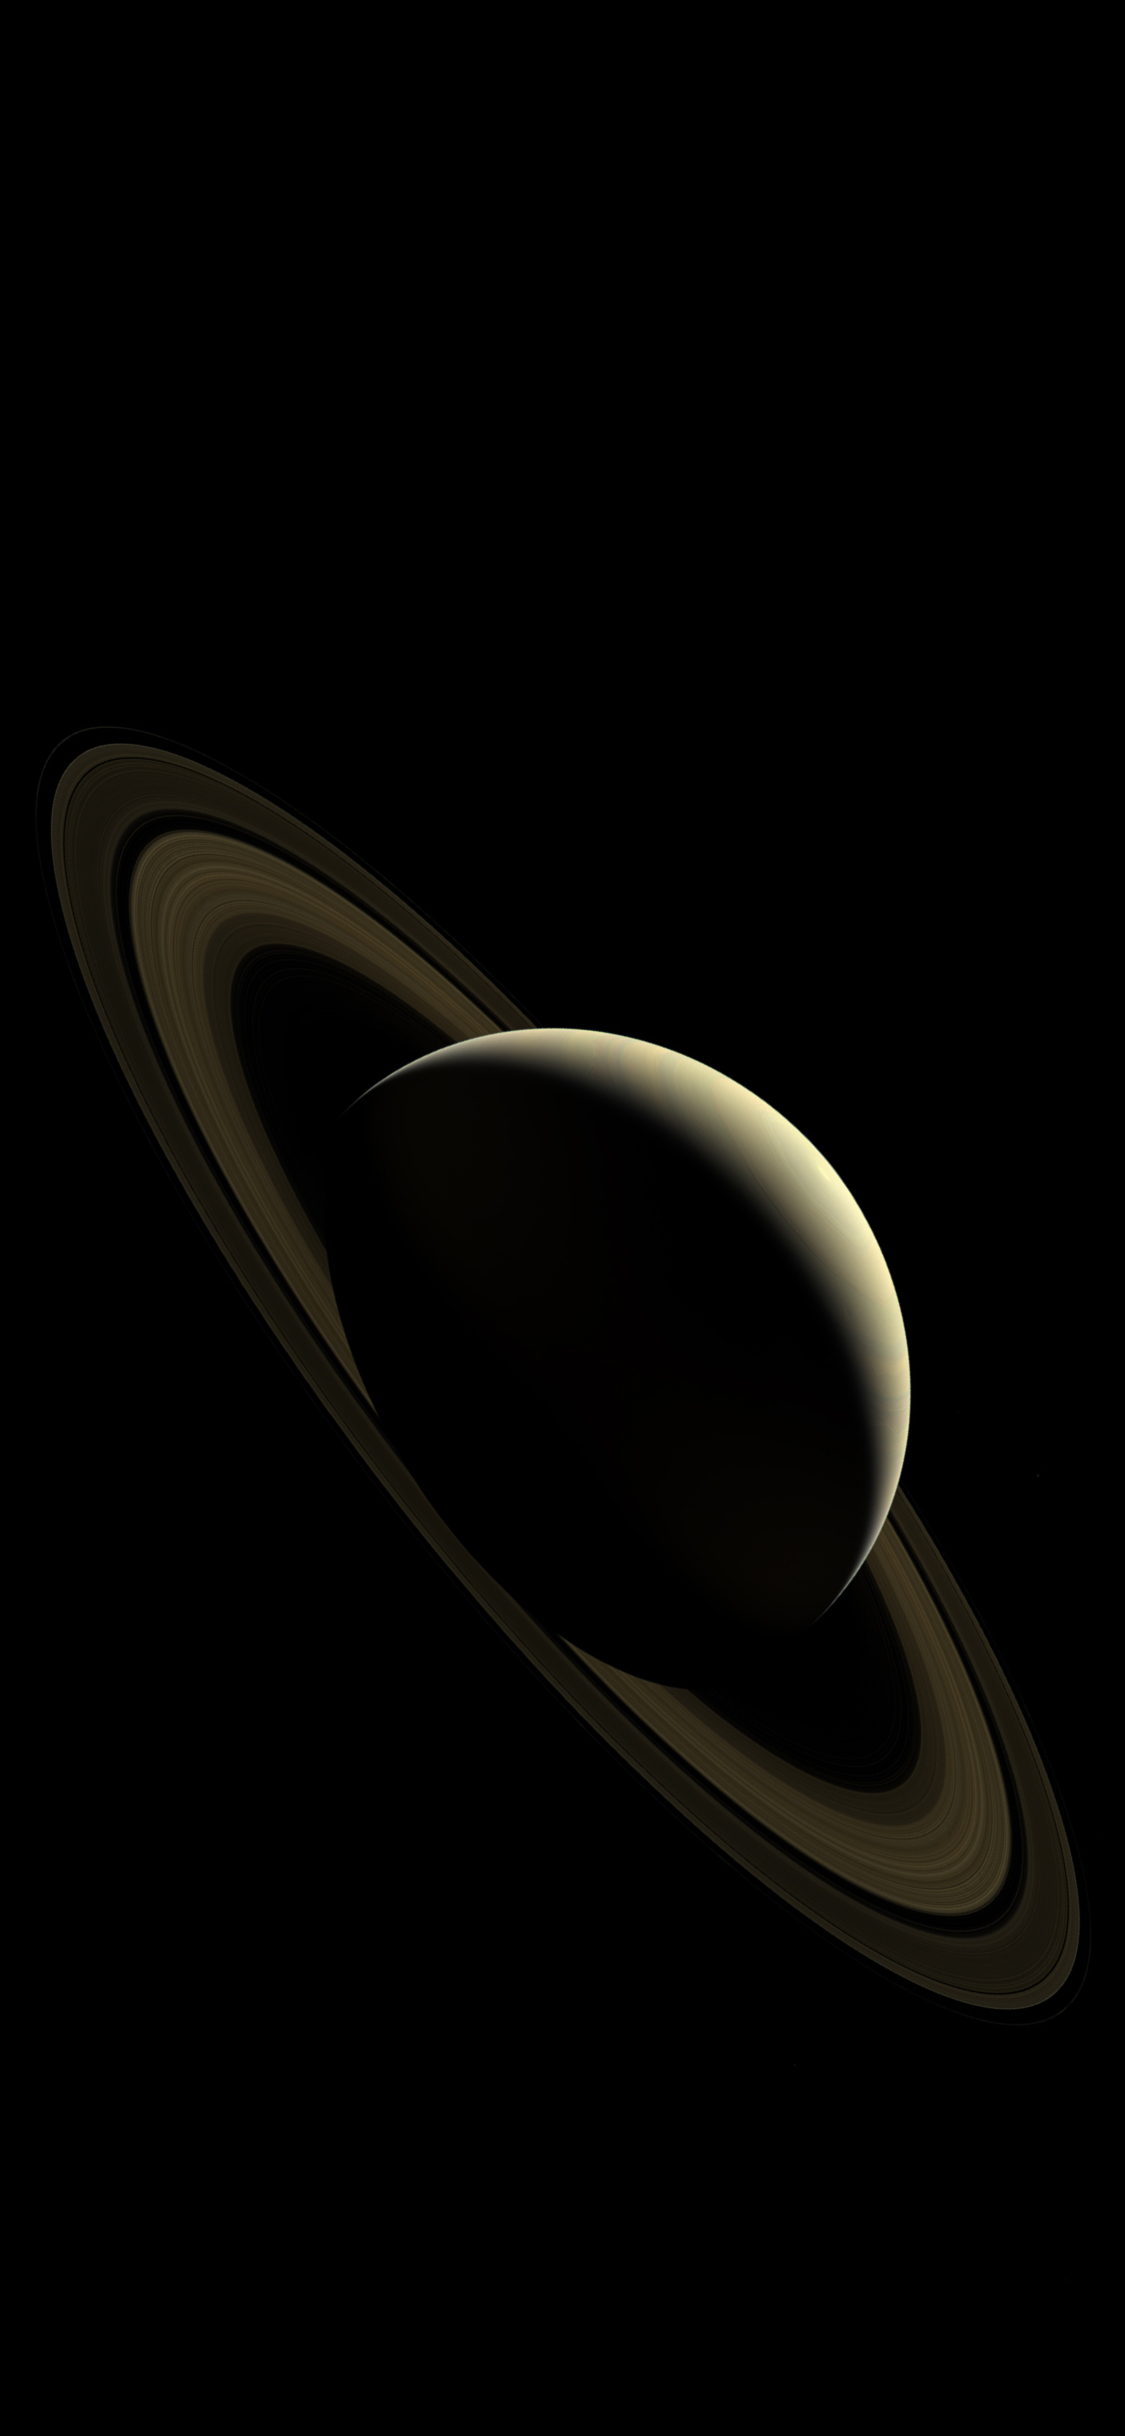 The Saturn planet with its facts. Saturn, Saturn planet, Full HD wallpaper android